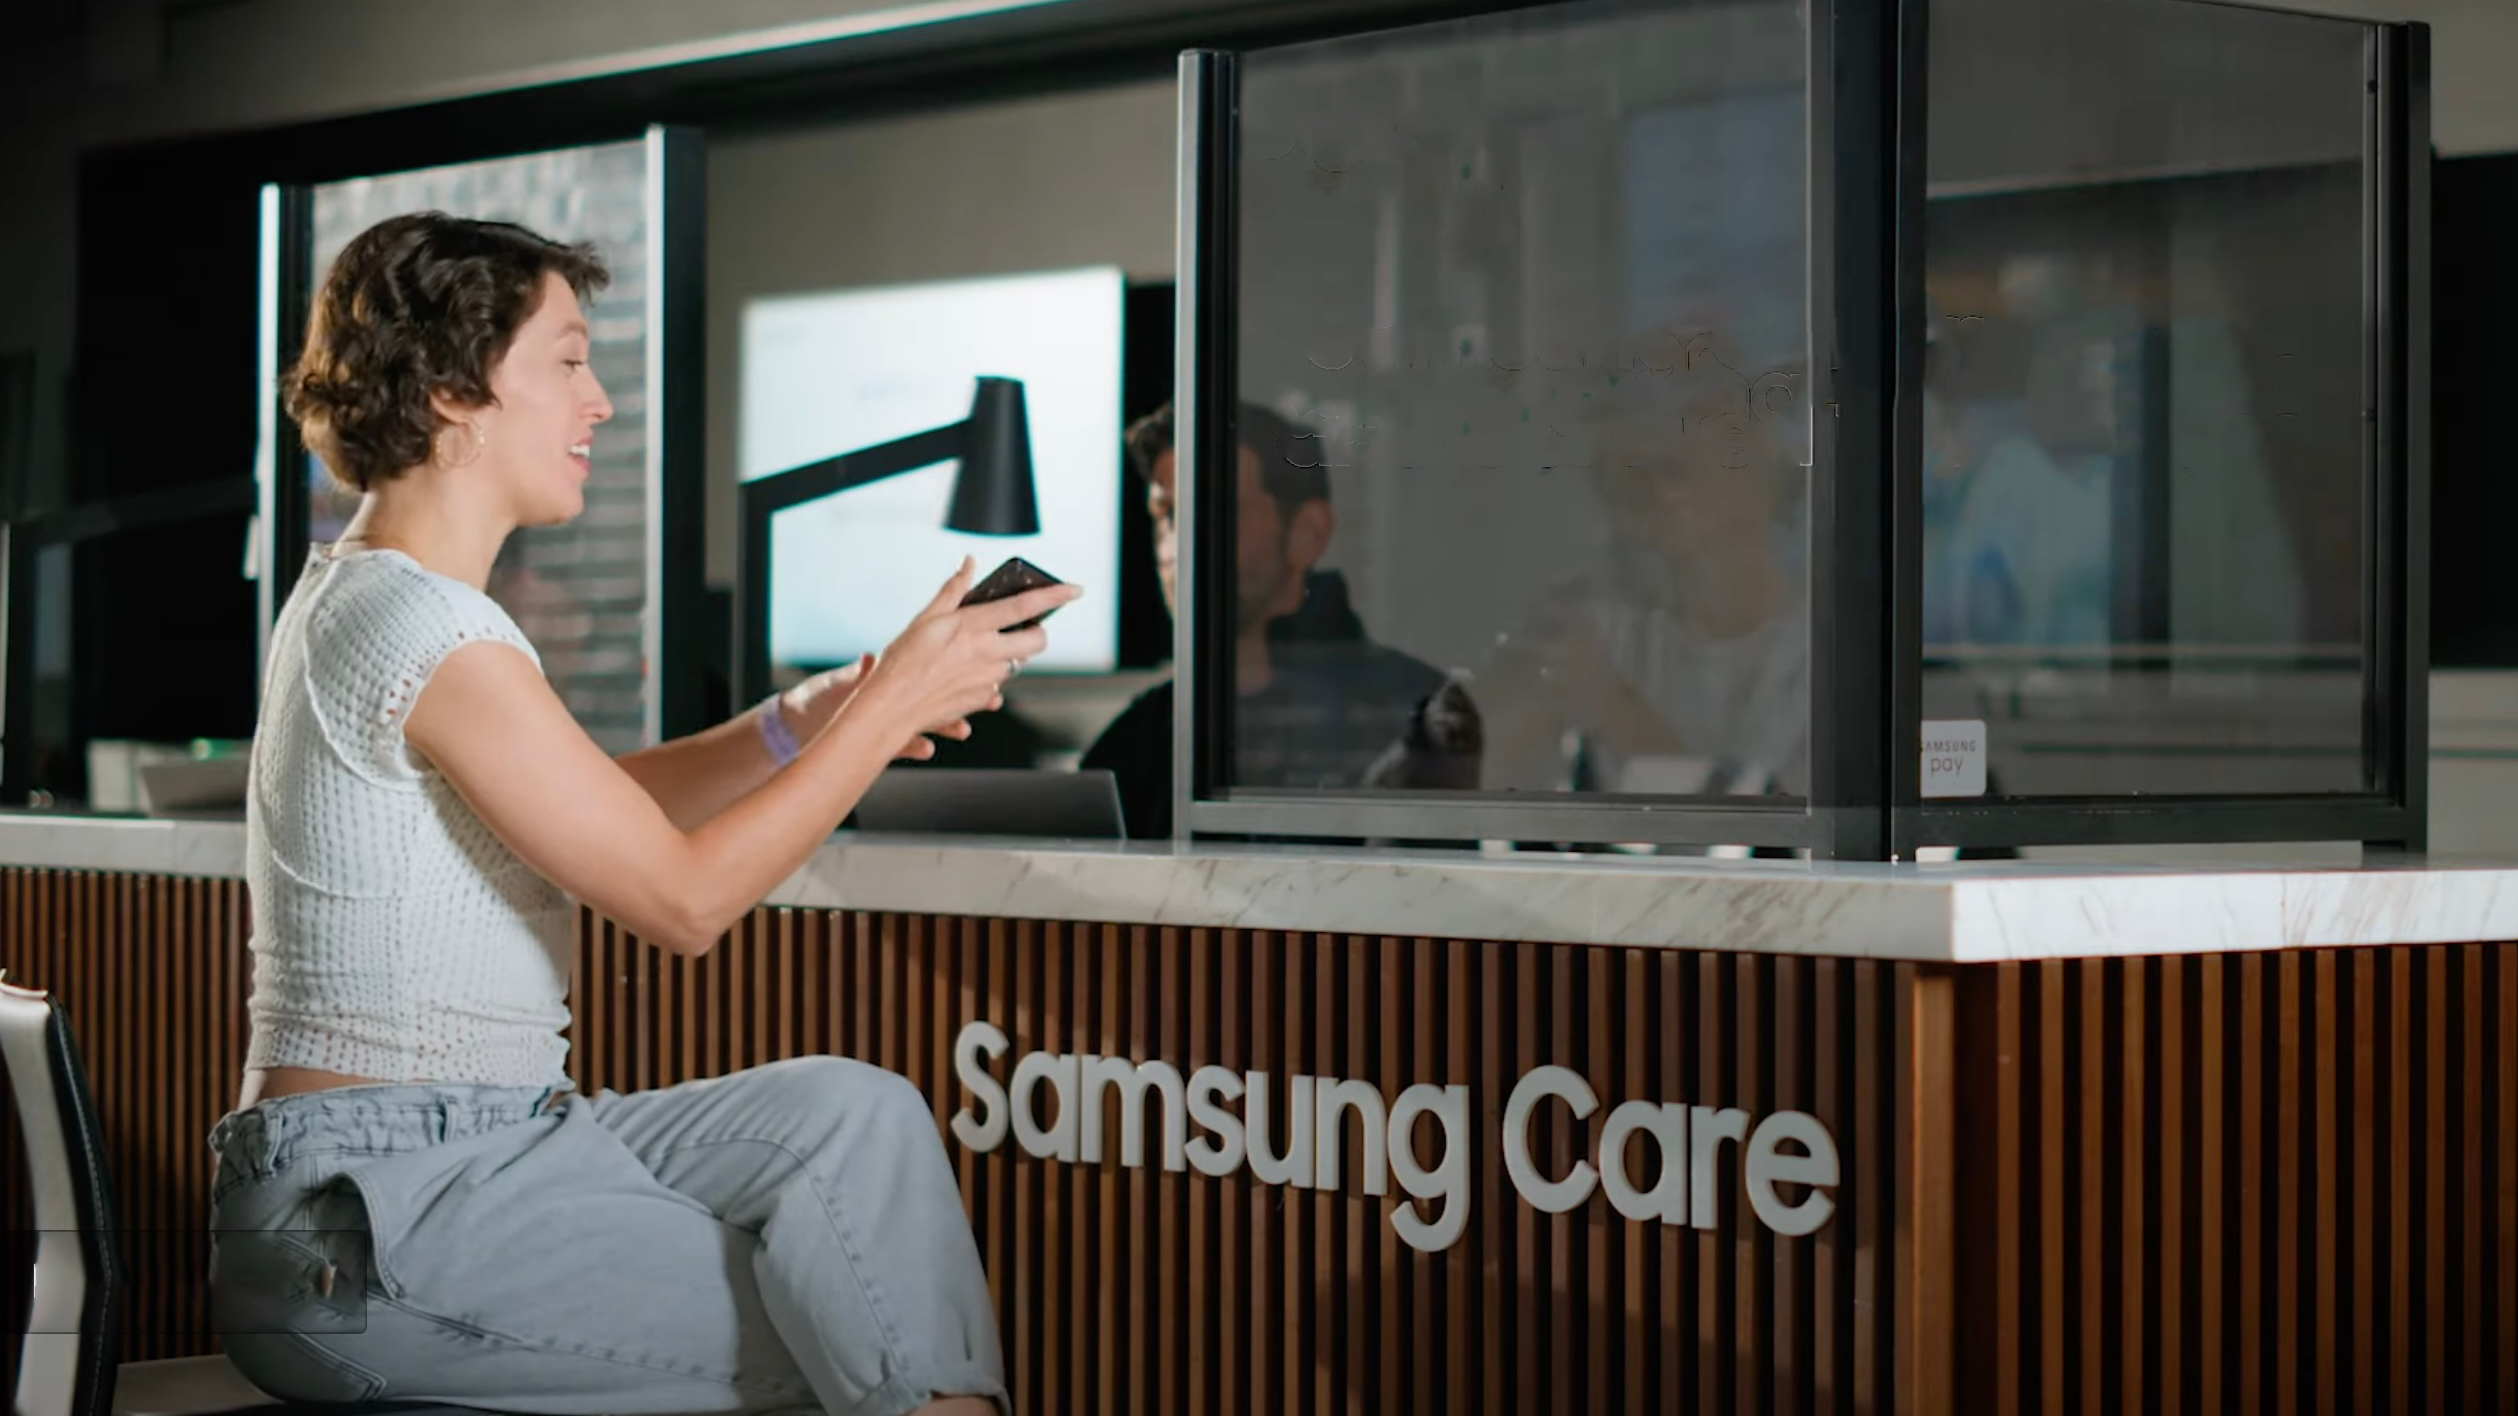 A woman sits at a Samsung Care counter holding a phone